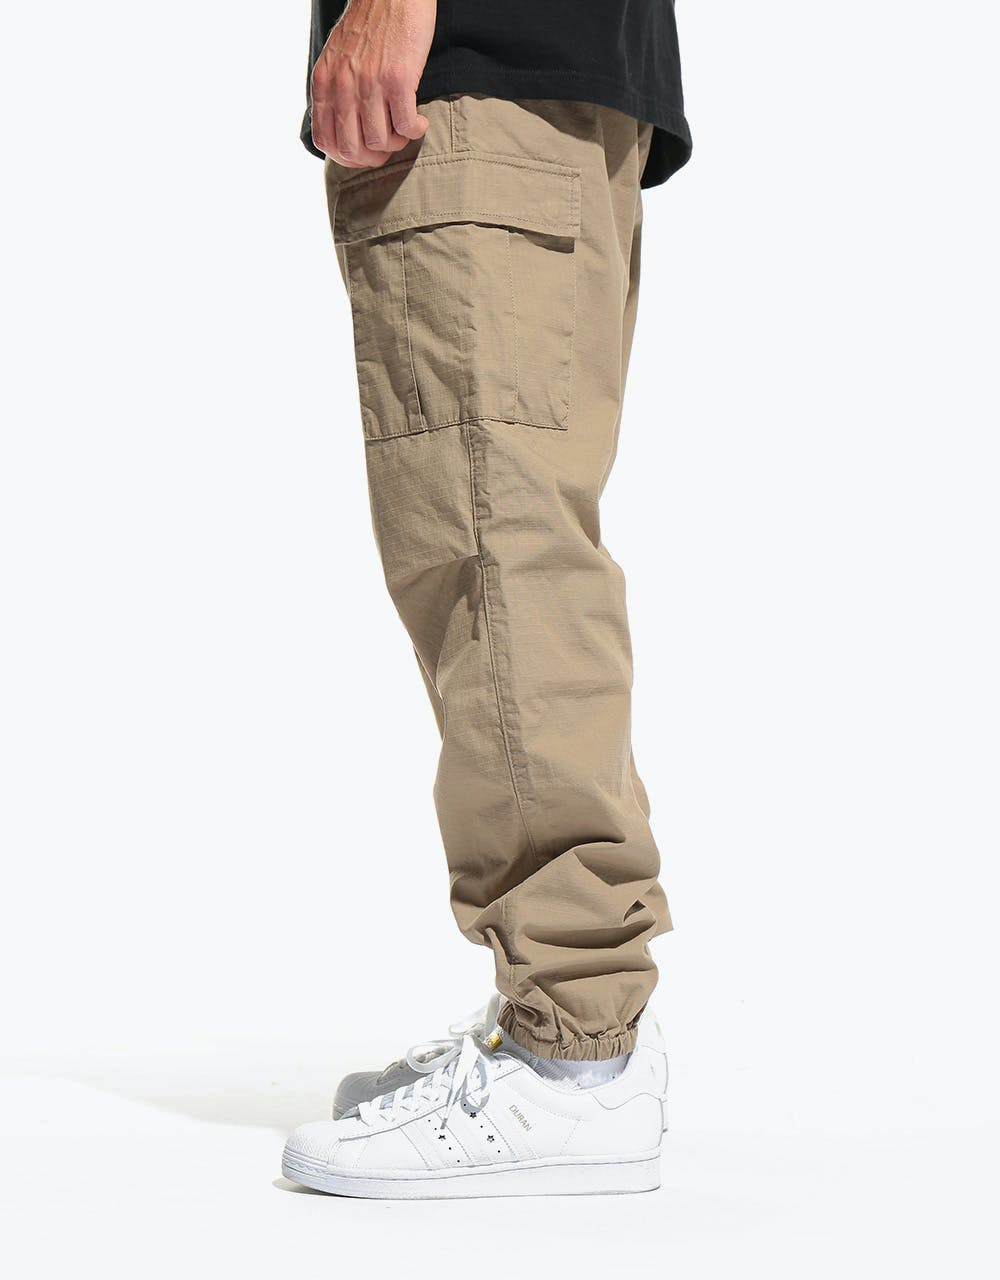 Carhartt WIP Cargo Jogger - Leather (Rinsed)